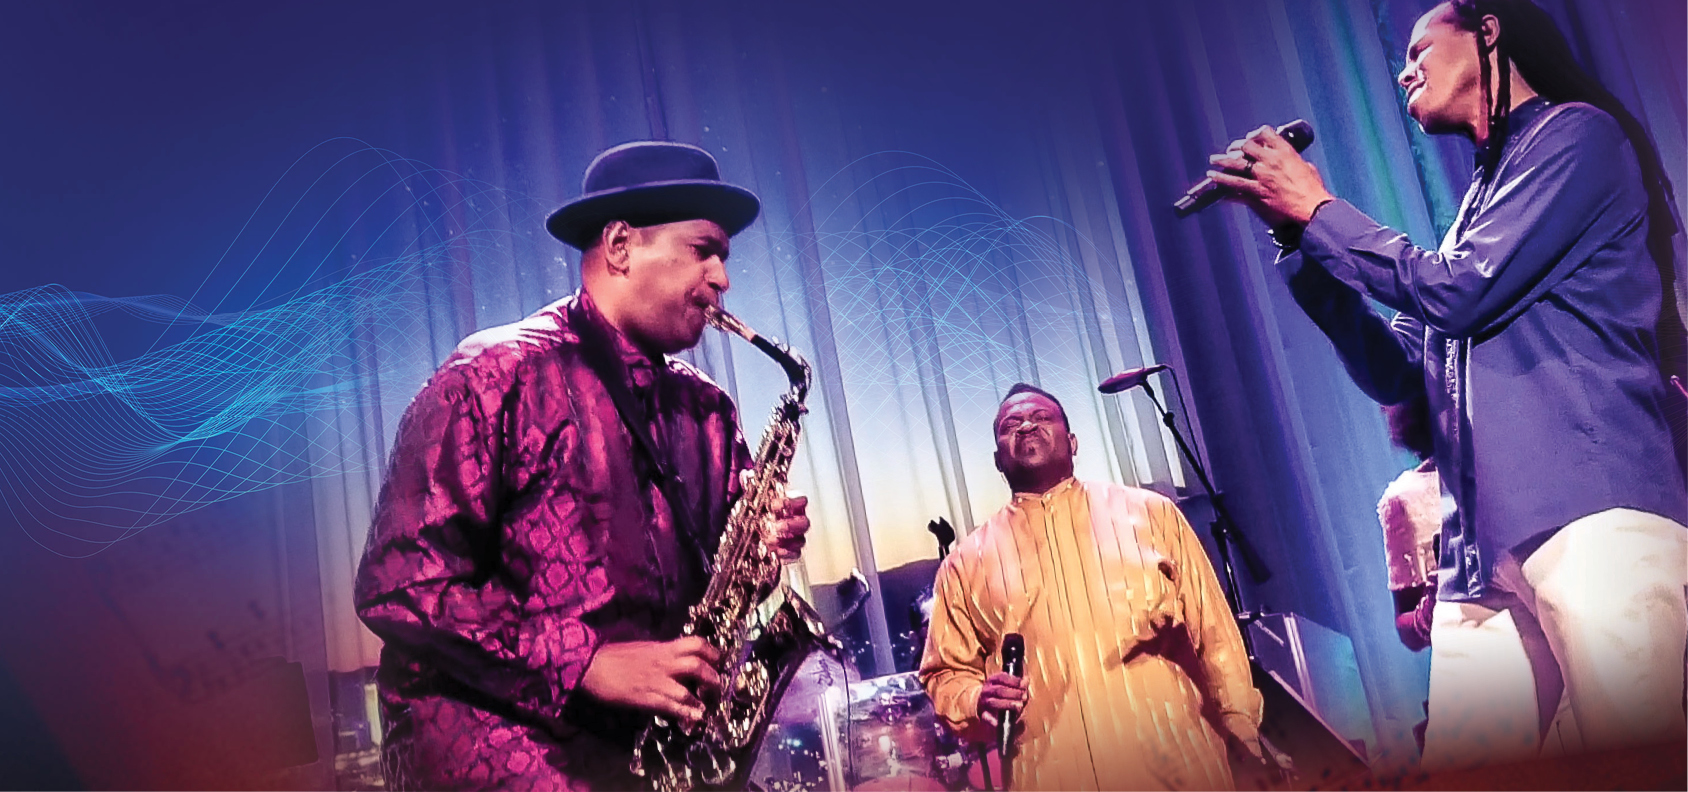 Three men wear colorful clothing and perform on stage, one playing saxophone, two singing into handheld microphones.